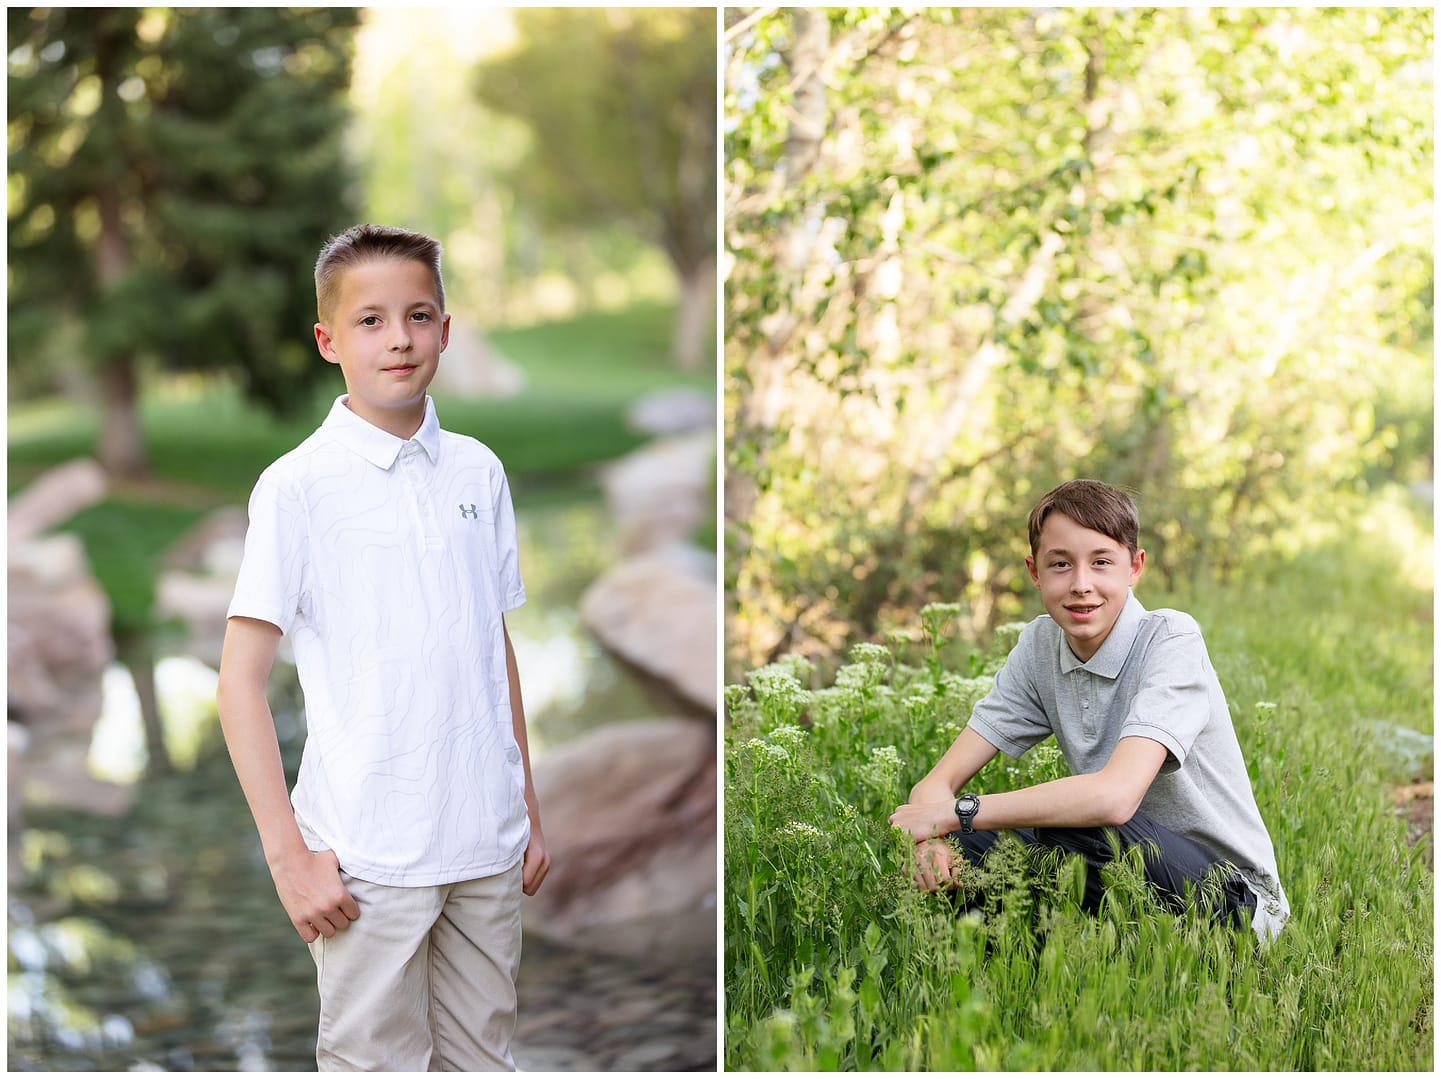 Brothers pose for portraits. Photos by Tiffany Hix Photography.